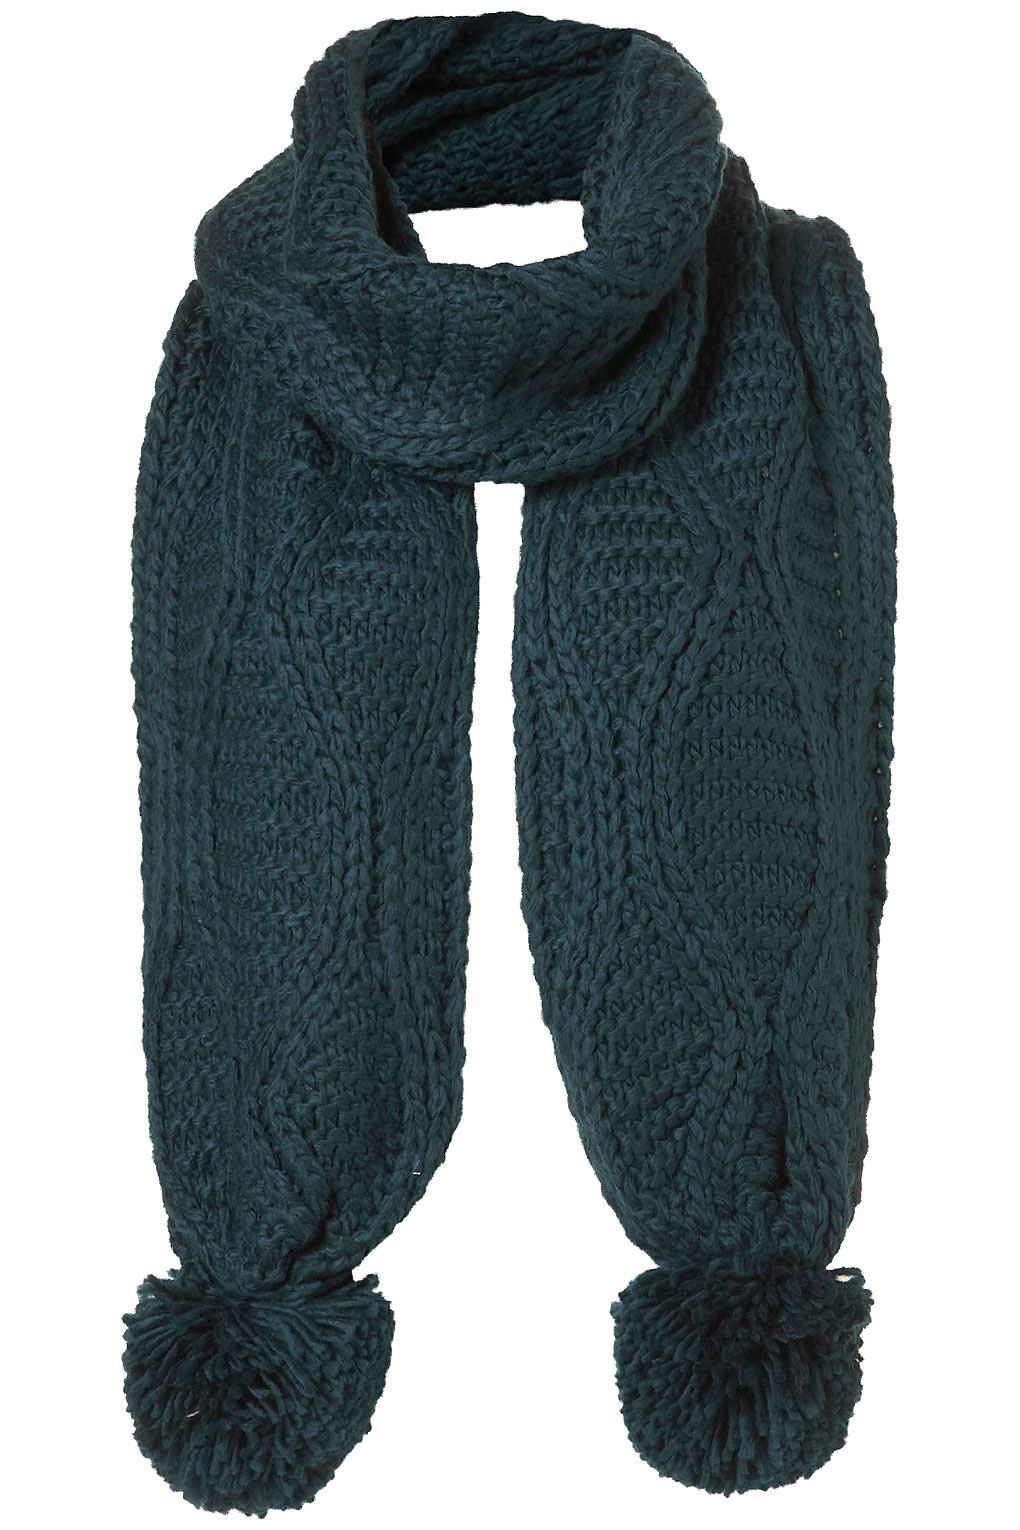 Lyst - Topshop Cable Pom Pom Scarf in Green